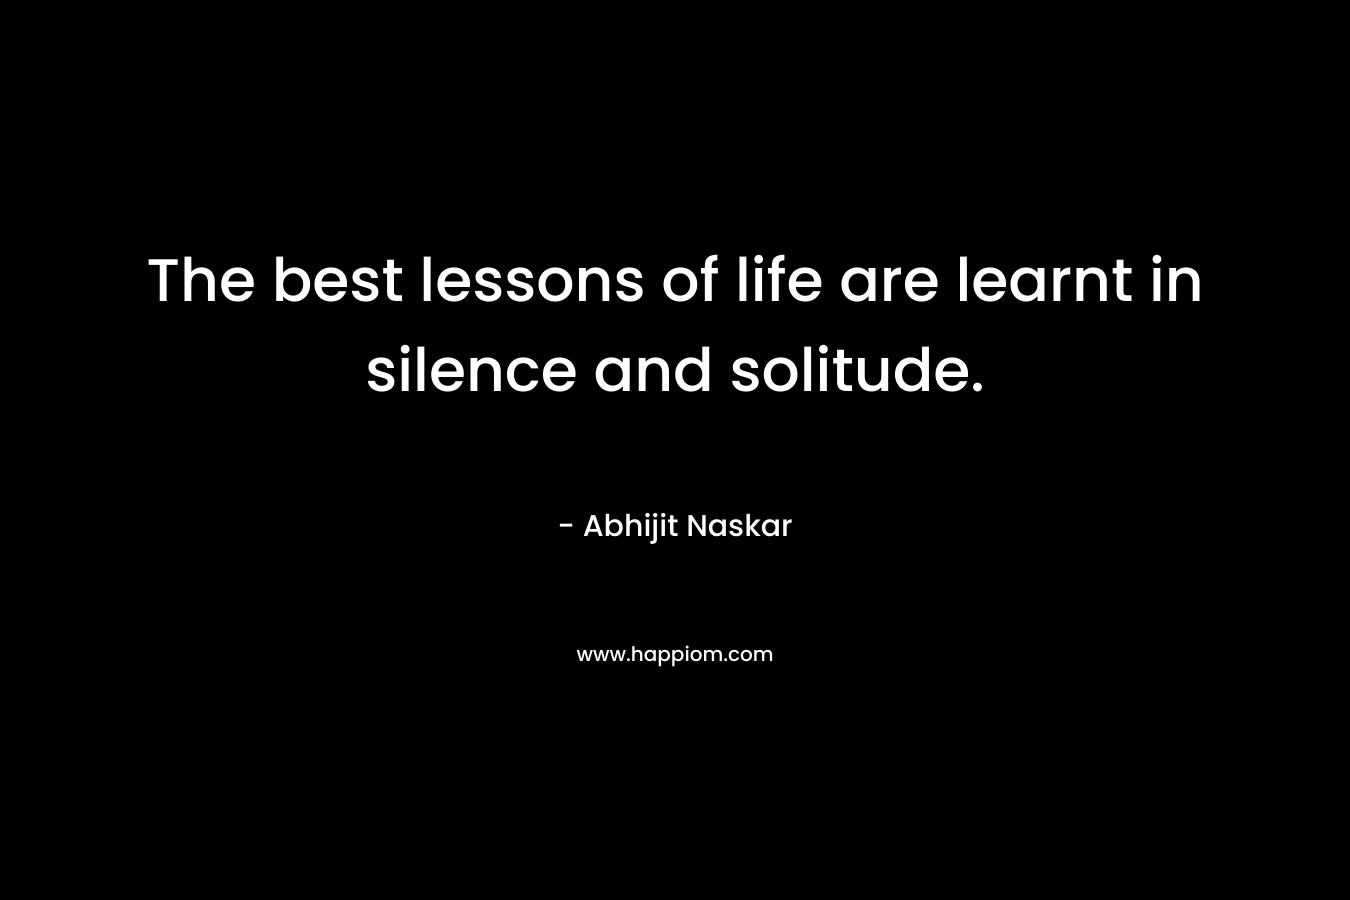 The best lessons of life are learnt in silence and solitude.